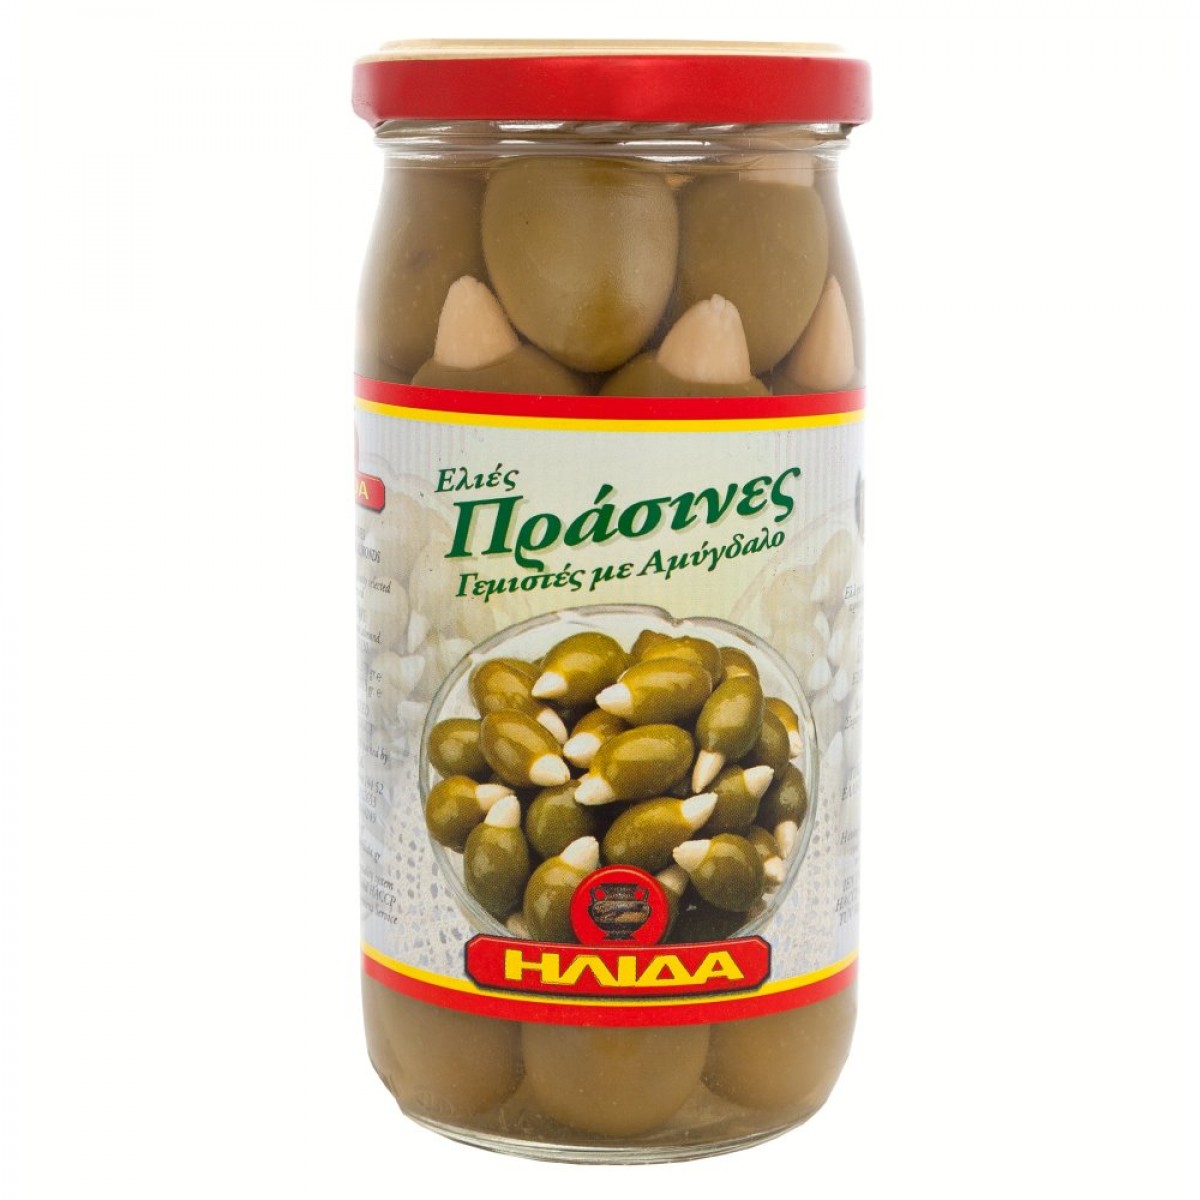 GREEN OLIVES STUFFED WITH ALMONDS IN BRINE